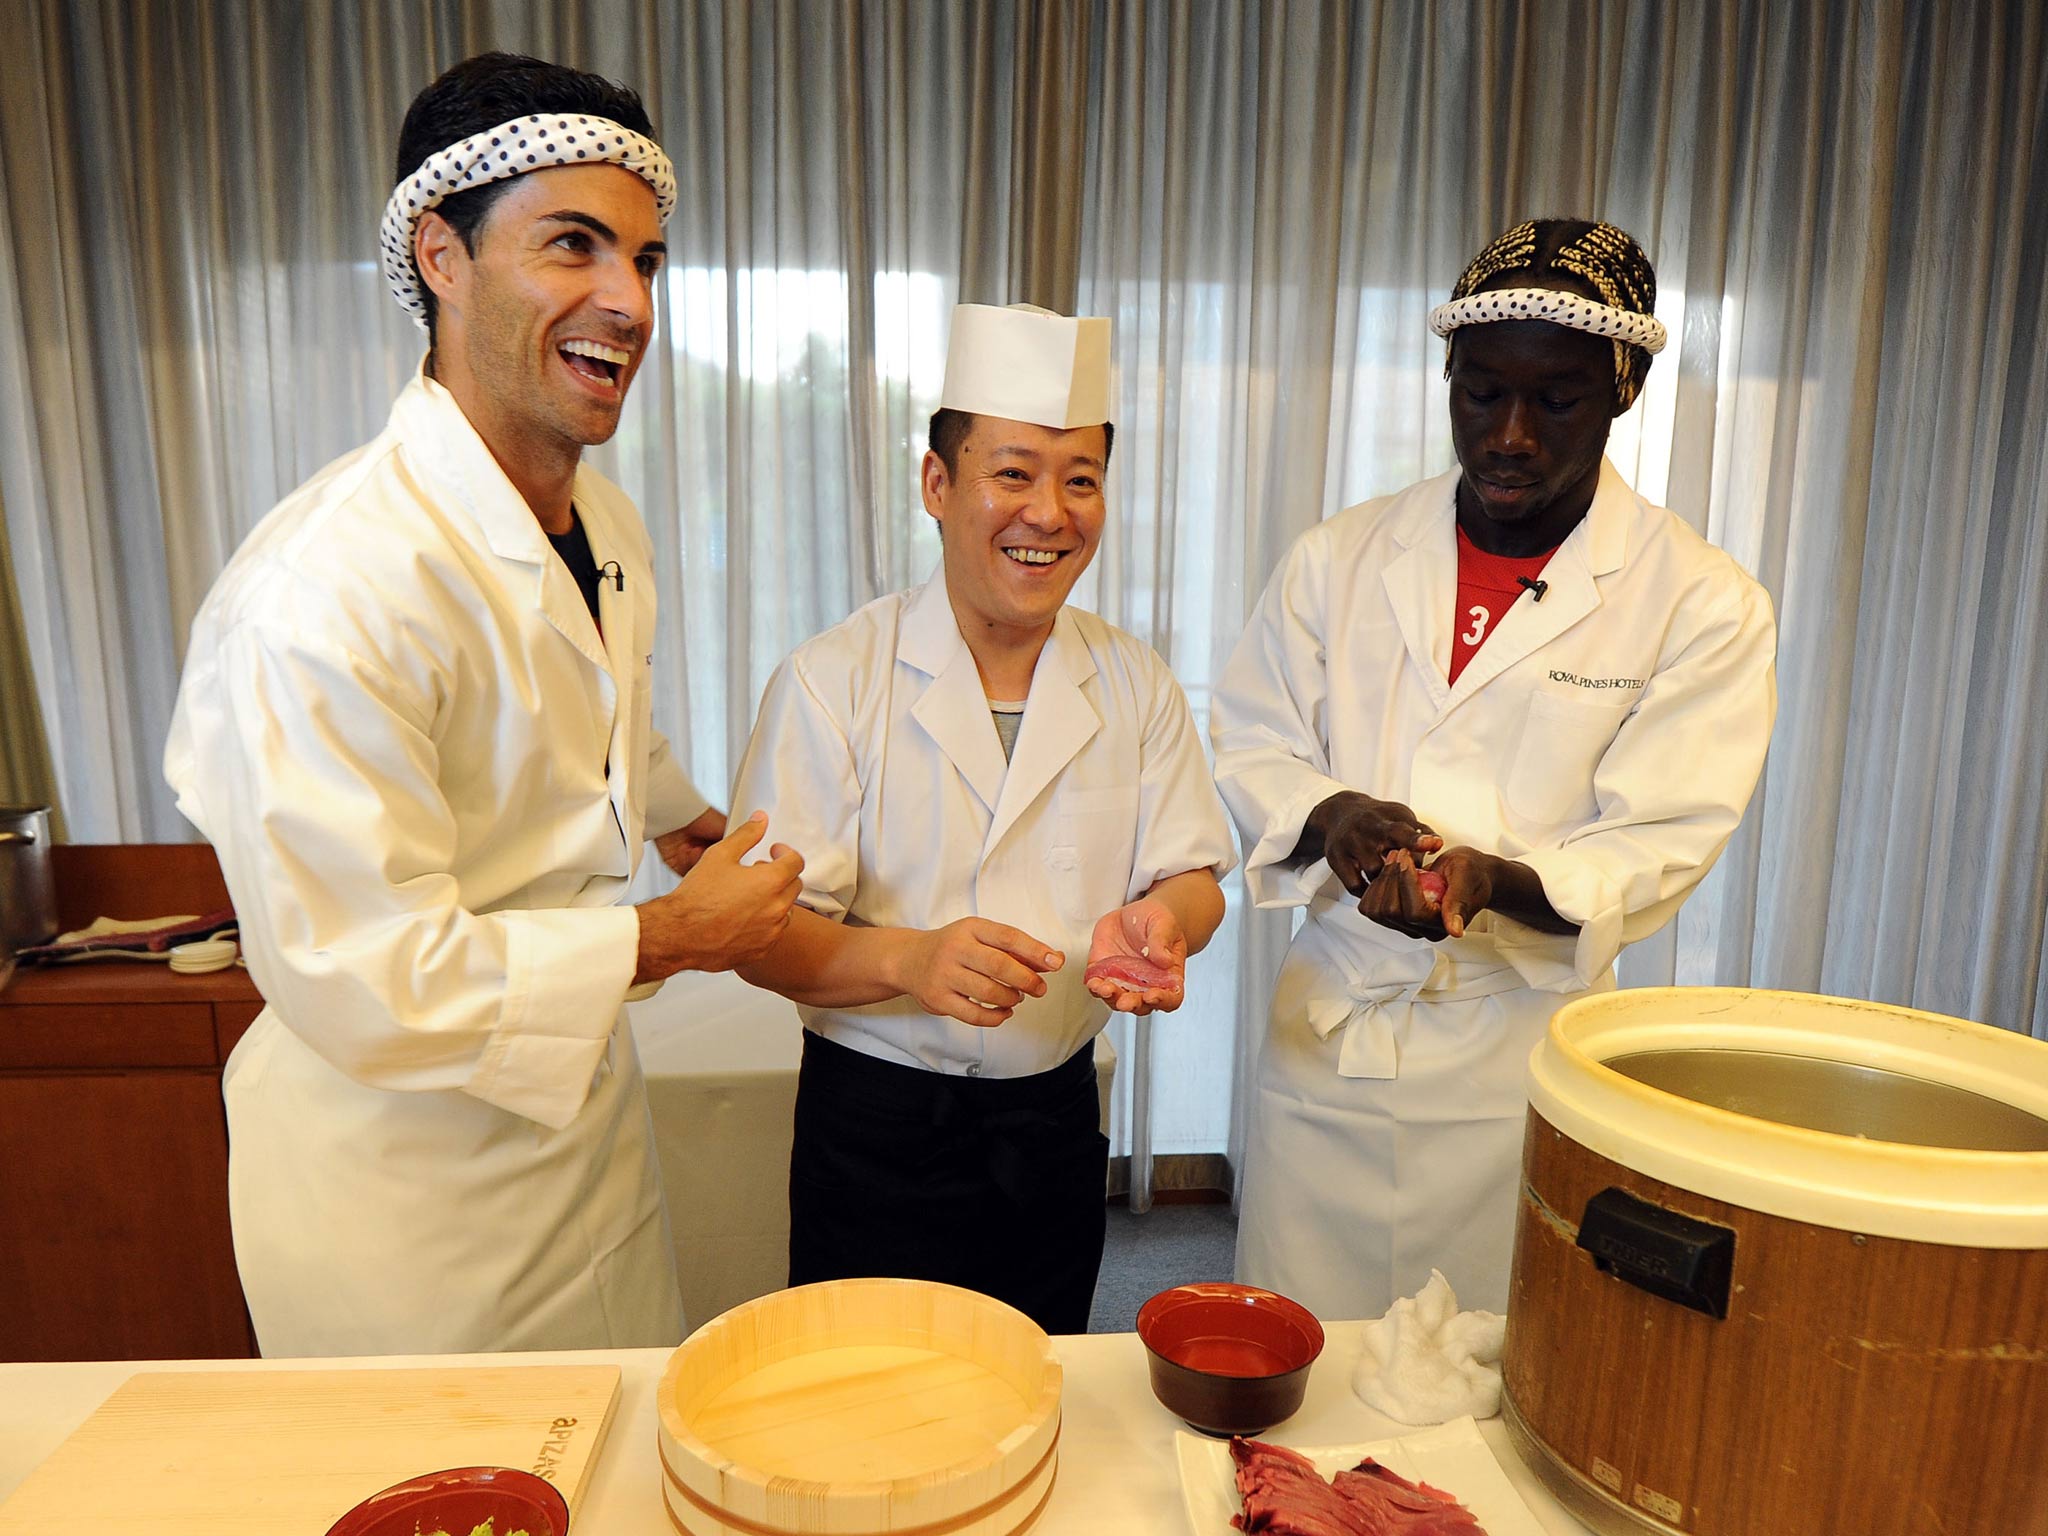 Mikel Arteta (L) and Bacary Sagna (R) of Arsenal FC are given a lesson in making Sushi from a top Sushi Chef in the Urawa Royal Pines Hotel in Japan